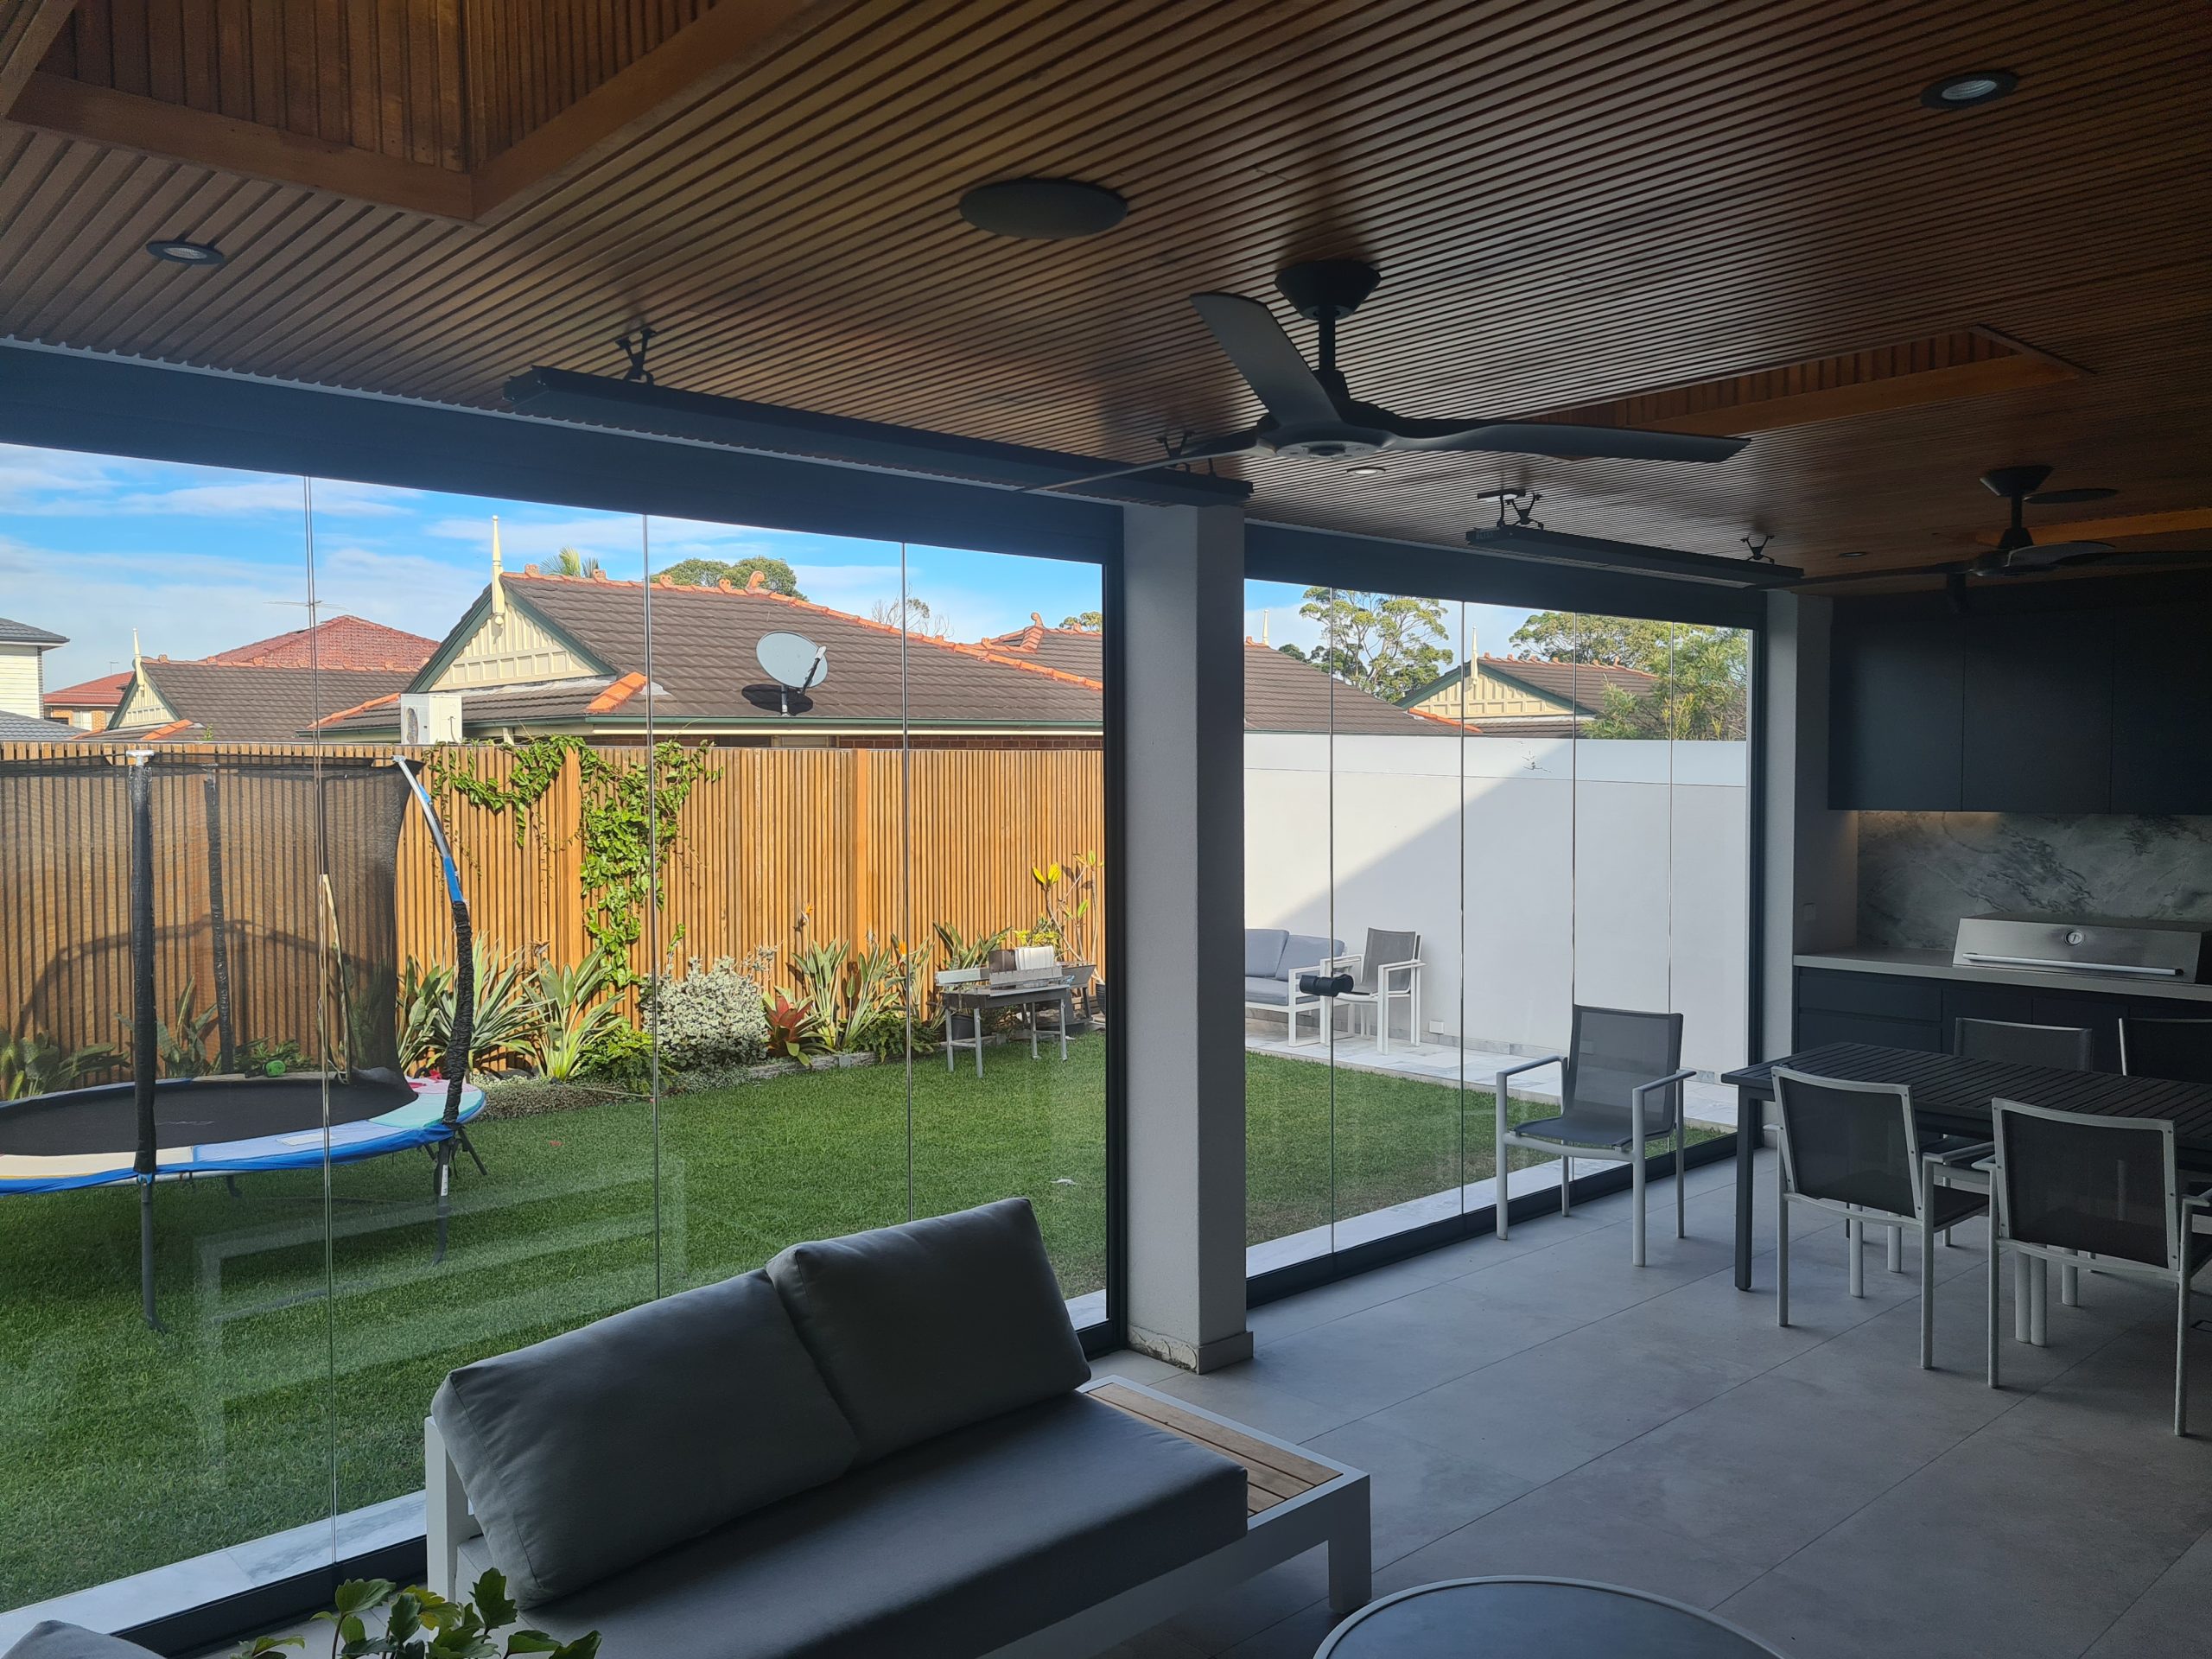 Enclosed patio for outdoor space